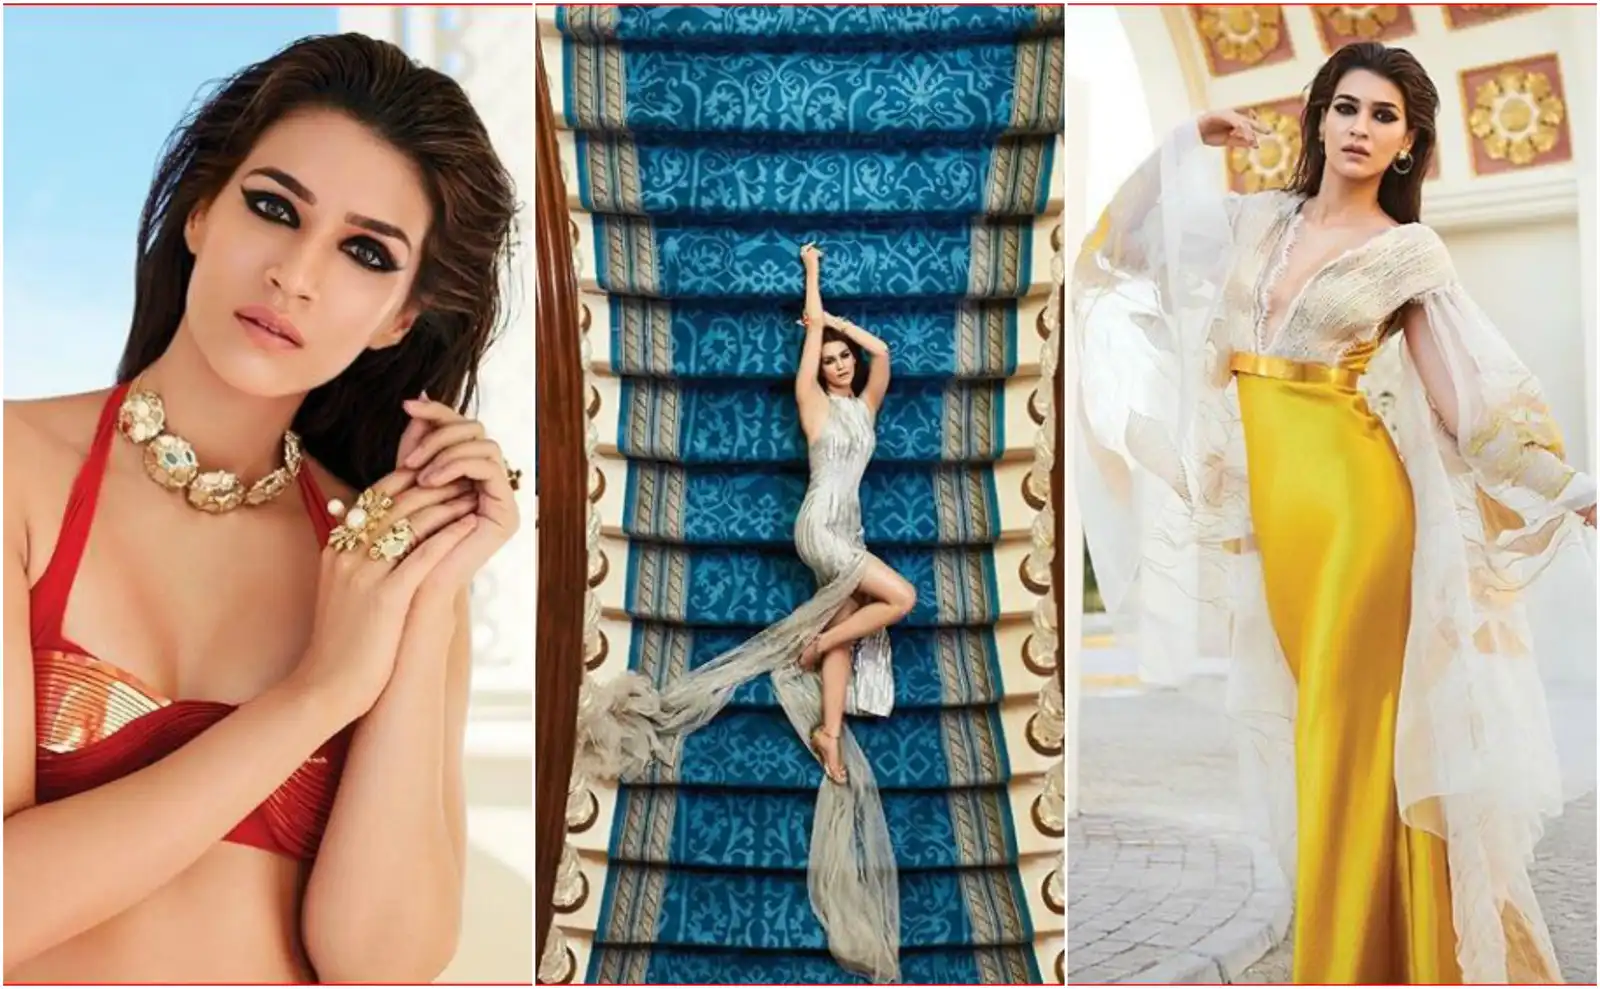 Kriti Sanon Is The Ultimate Turkish Dream In Her Exotic New Photoshoot For A Magazine